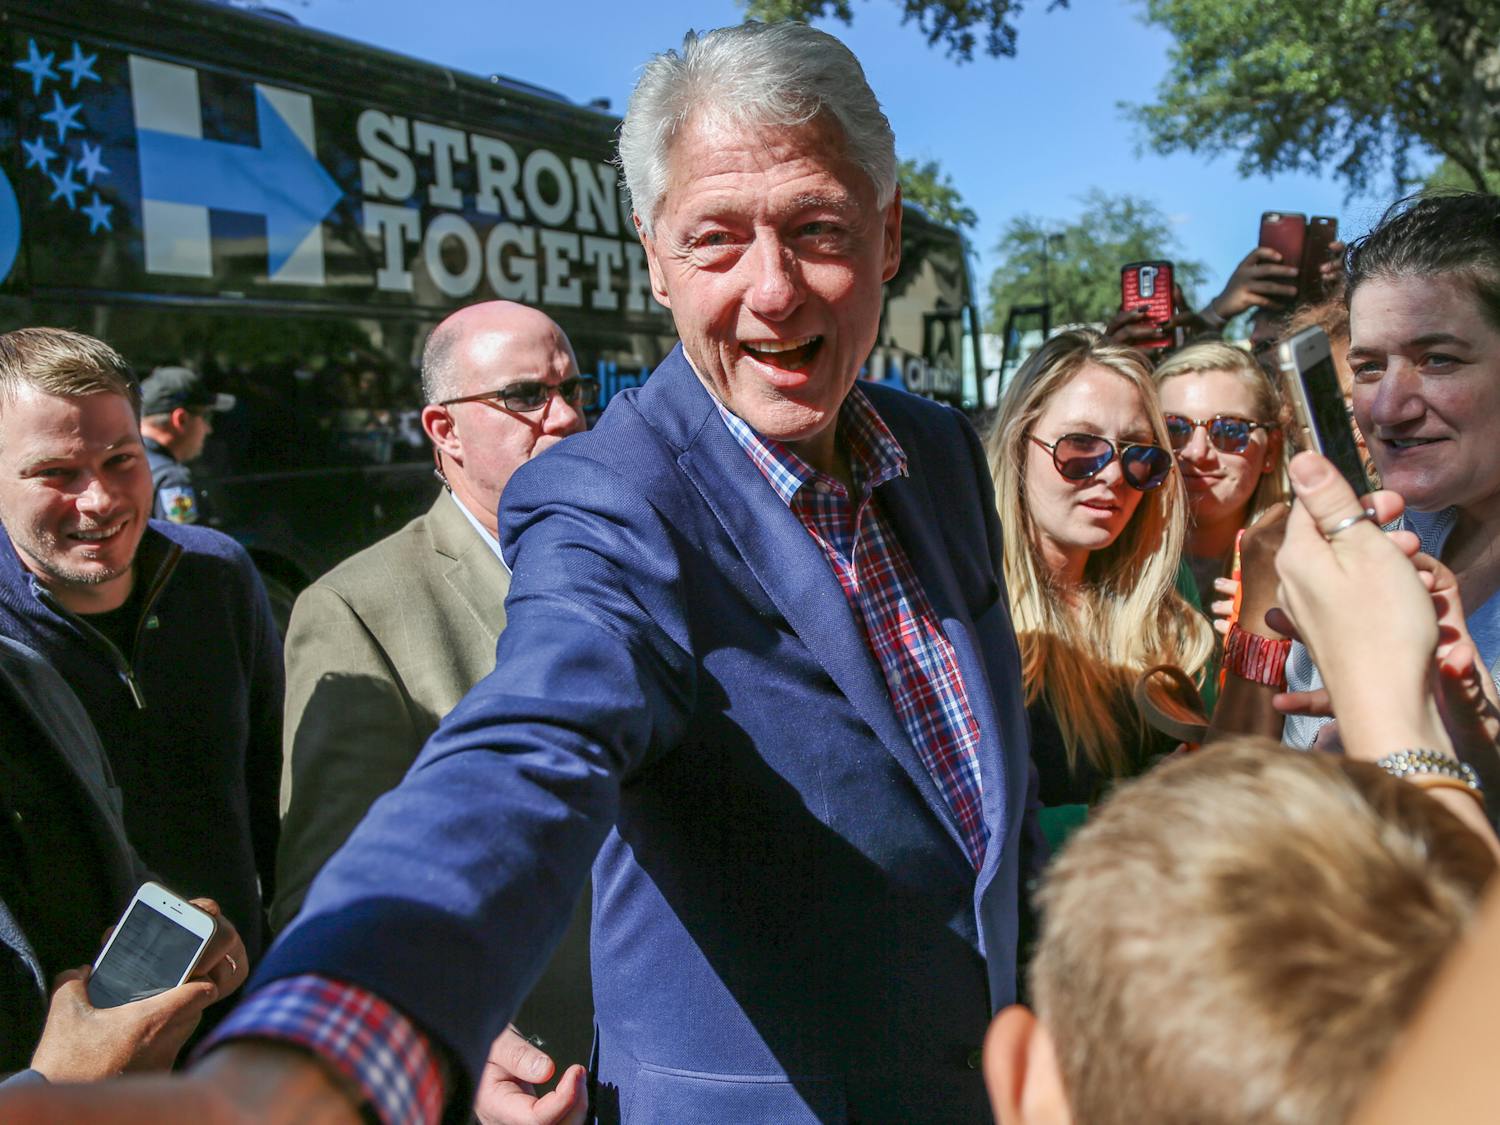 Former President Bill Clinton visited Gainesville Saturday as part of a bus tour to rally votes in Florida for Democratic presidential candidate Hillary Clinton, three days before Election Day and on the last day of early voting in Alachua County.